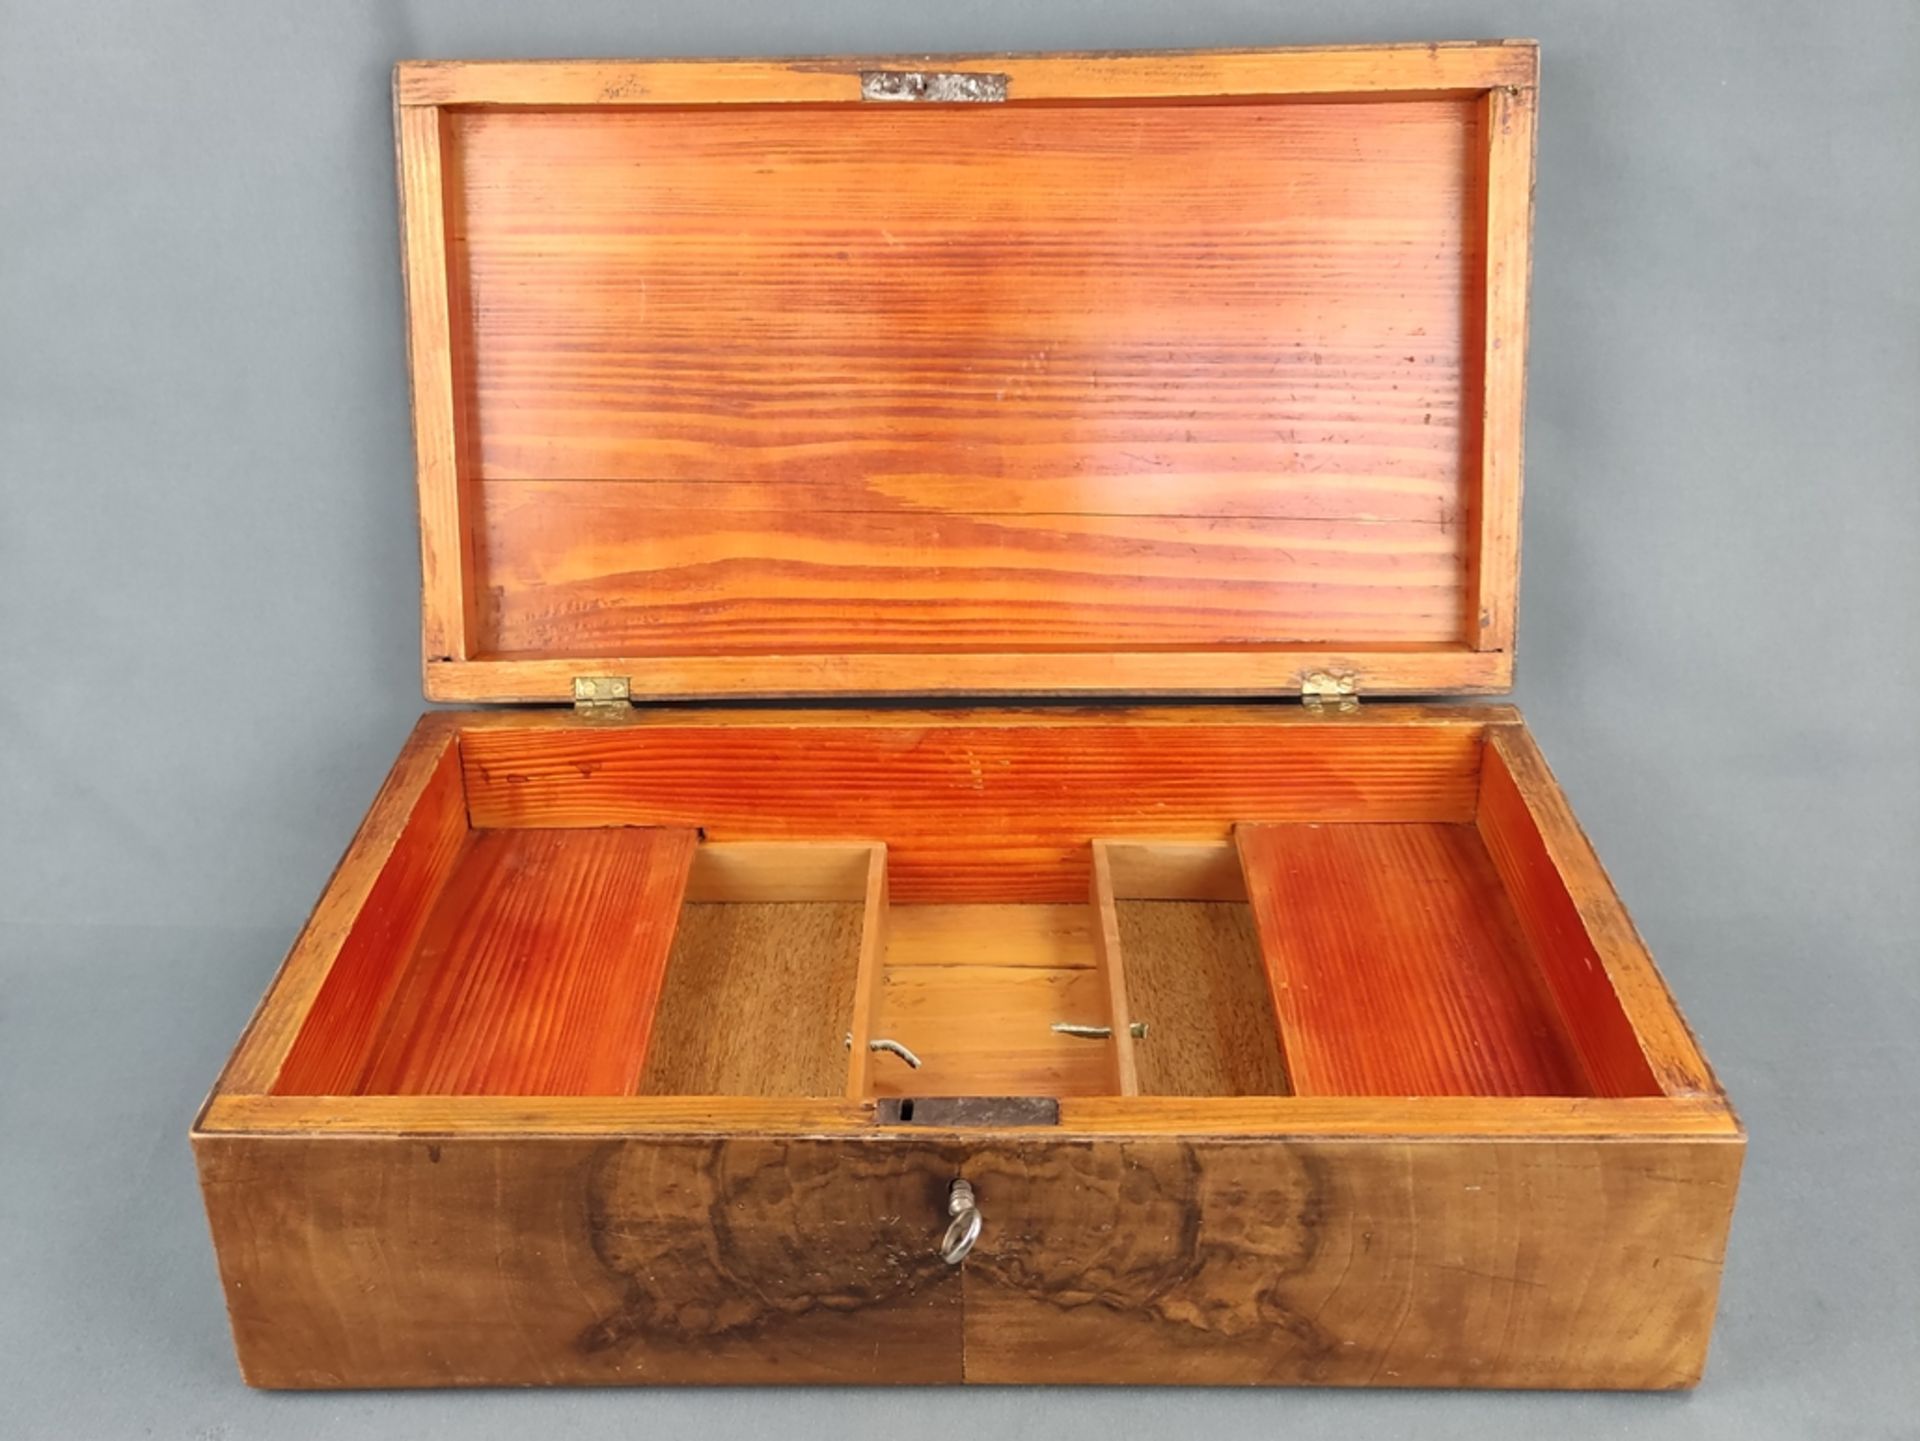 Casket, 19th century, rectangular form, burl wood veneered, interior with two drawers (very difficu - Image 2 of 4